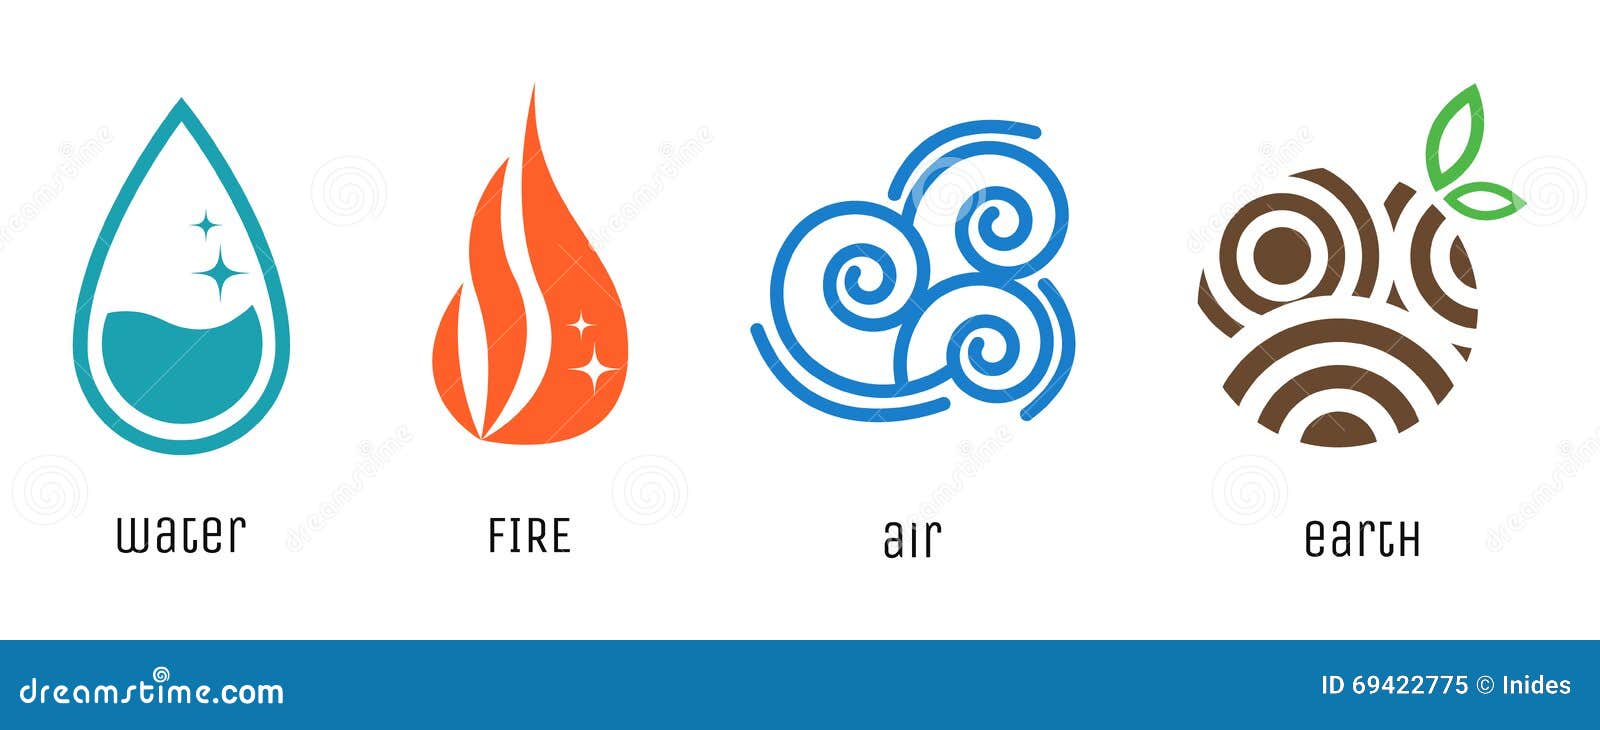 Premium Vector  Four natural elements icon set water air fire earth  illustration symbol sign nature concept vector